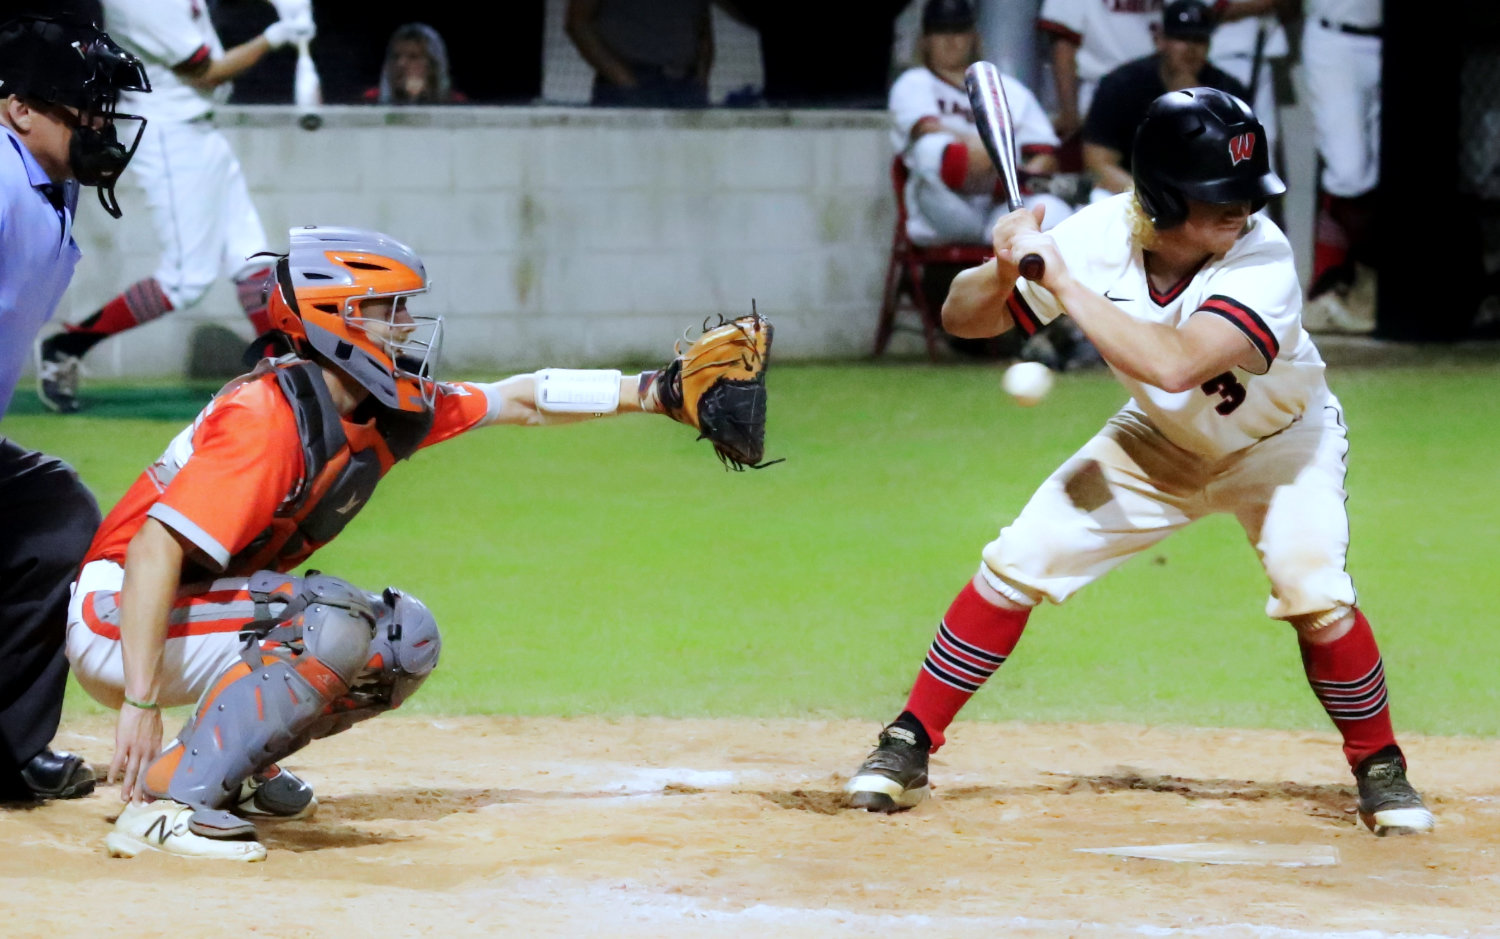 This photo sums up the outcome of Tuesday’s Mineola vs Winnsboro game, as Yellowjacket starter Spencer Joyner threw a masterful game. Catcher Coy Anderson receives the pitch.